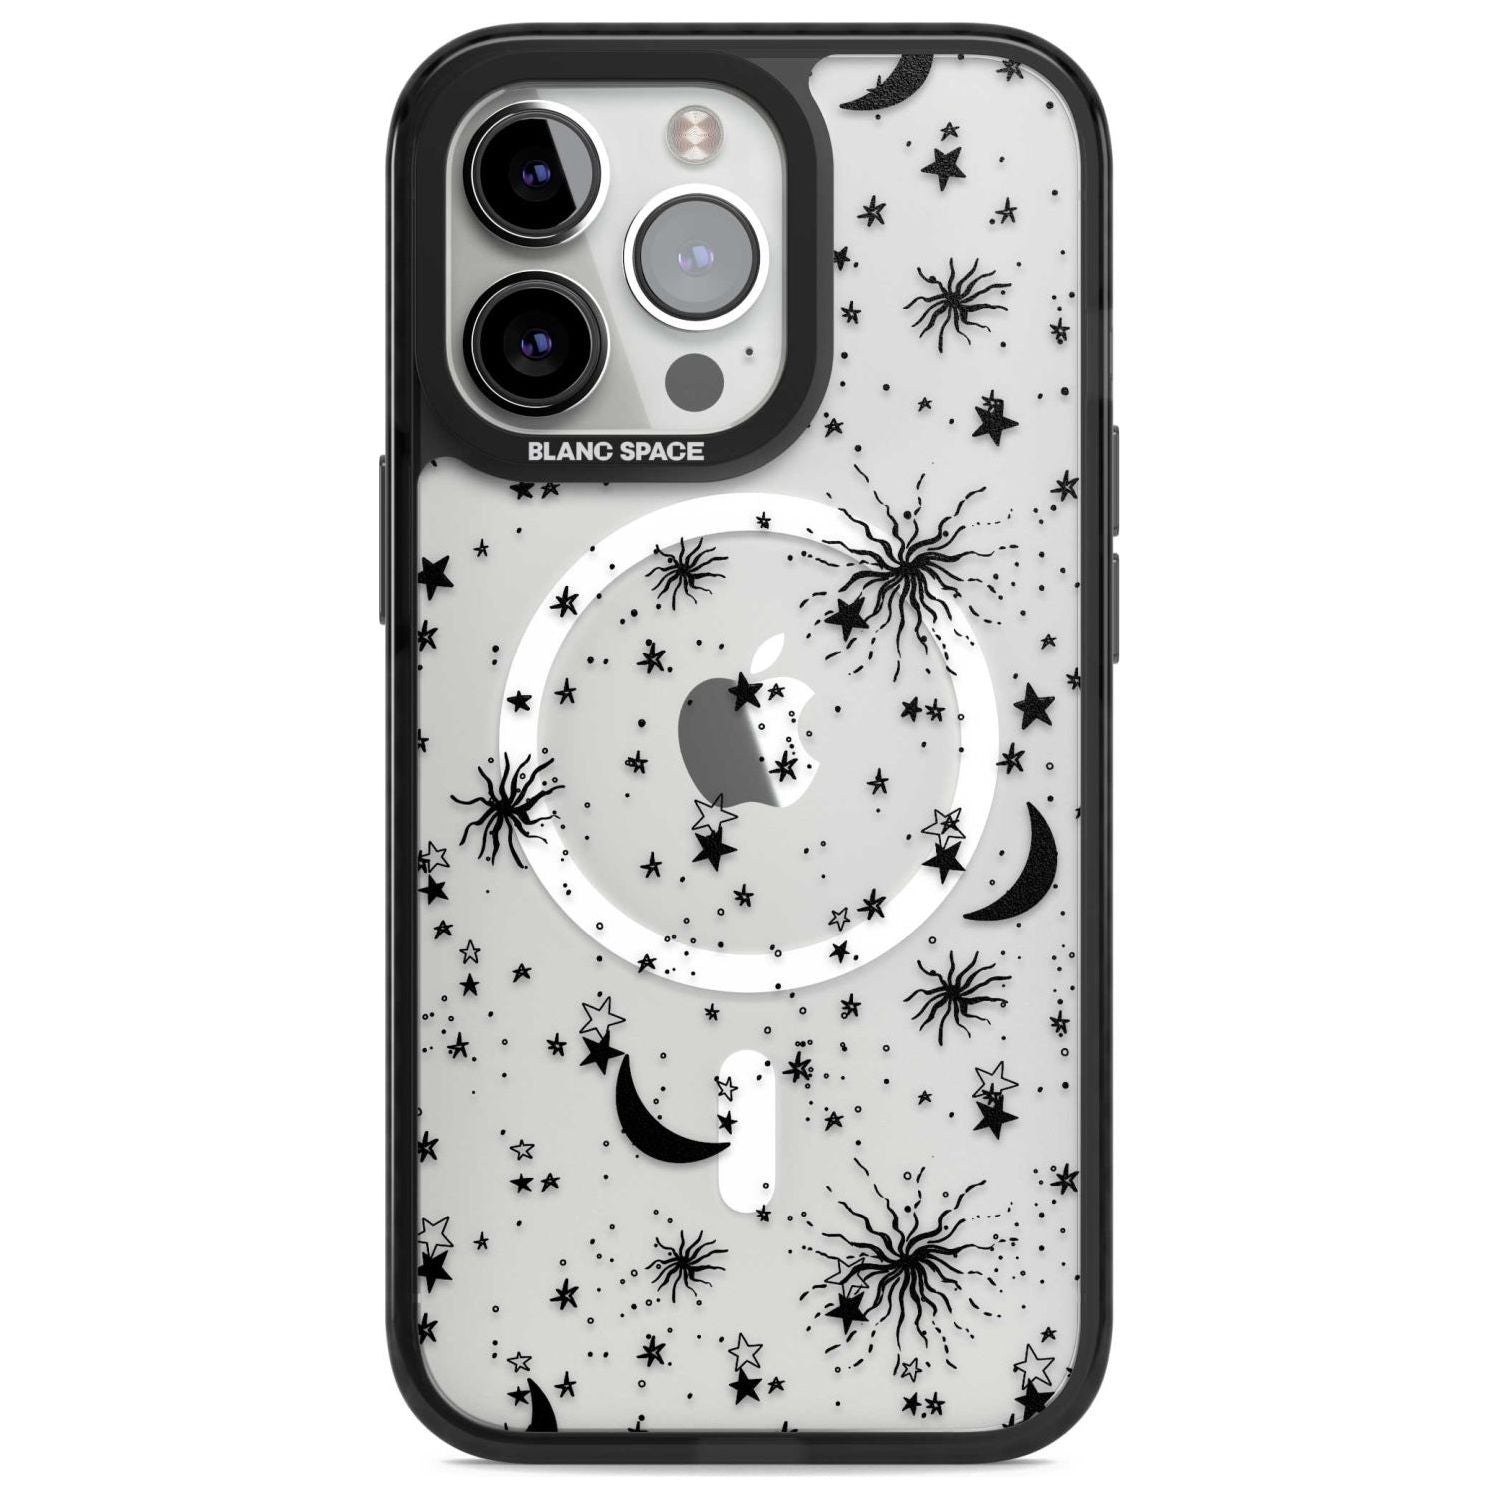 Moons & Stars Phone Case iPhone 15 Pro Max / Magsafe Black Impact Case,iPhone 15 Pro / Magsafe Black Impact Case,iPhone 14 Pro Max / Magsafe Black Impact Case,iPhone 14 Pro / Magsafe Black Impact Case,iPhone 13 Pro / Magsafe Black Impact Case Blanc Space